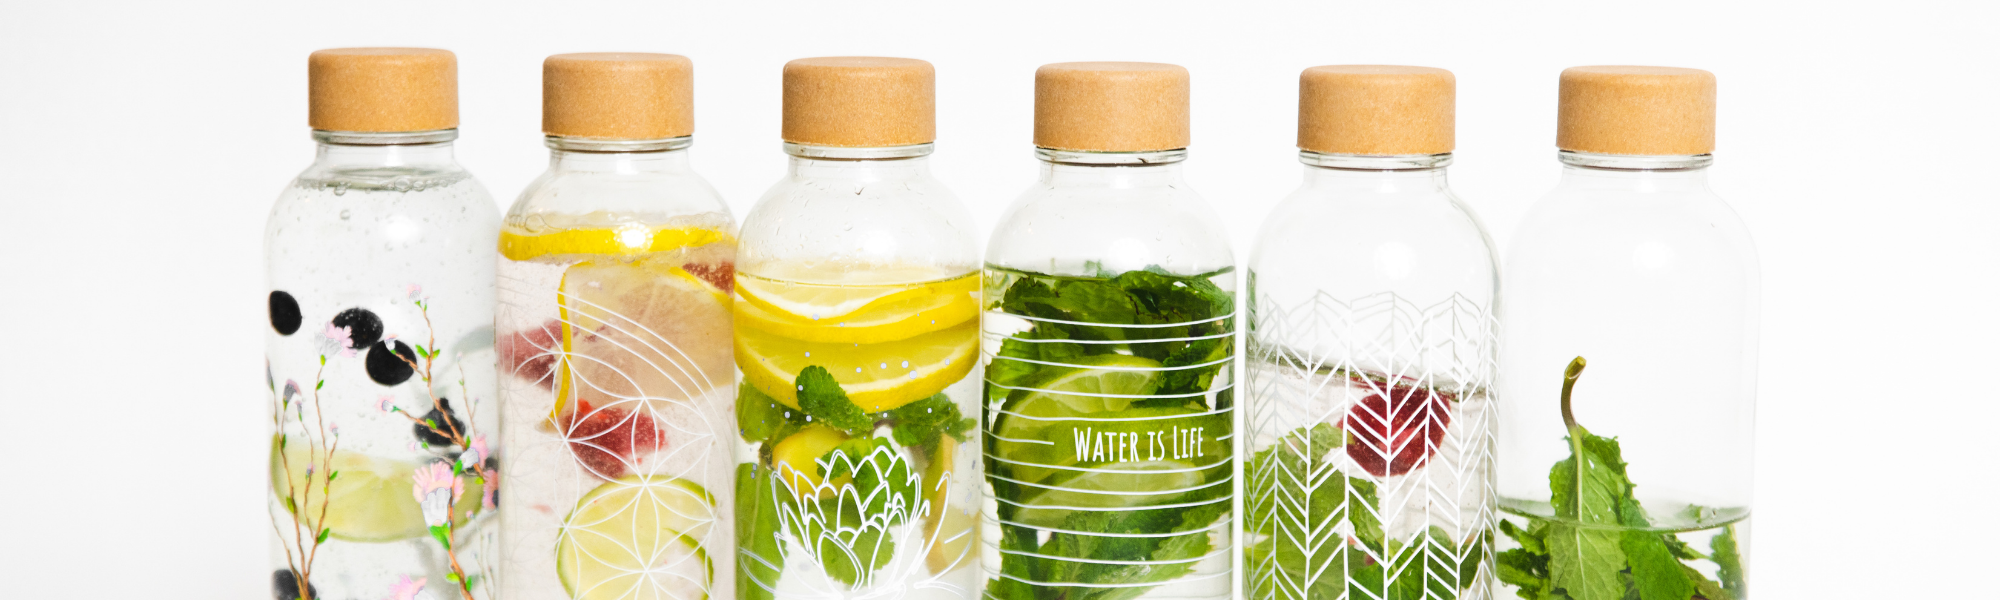 Unsere CARRYS mit Infused Water